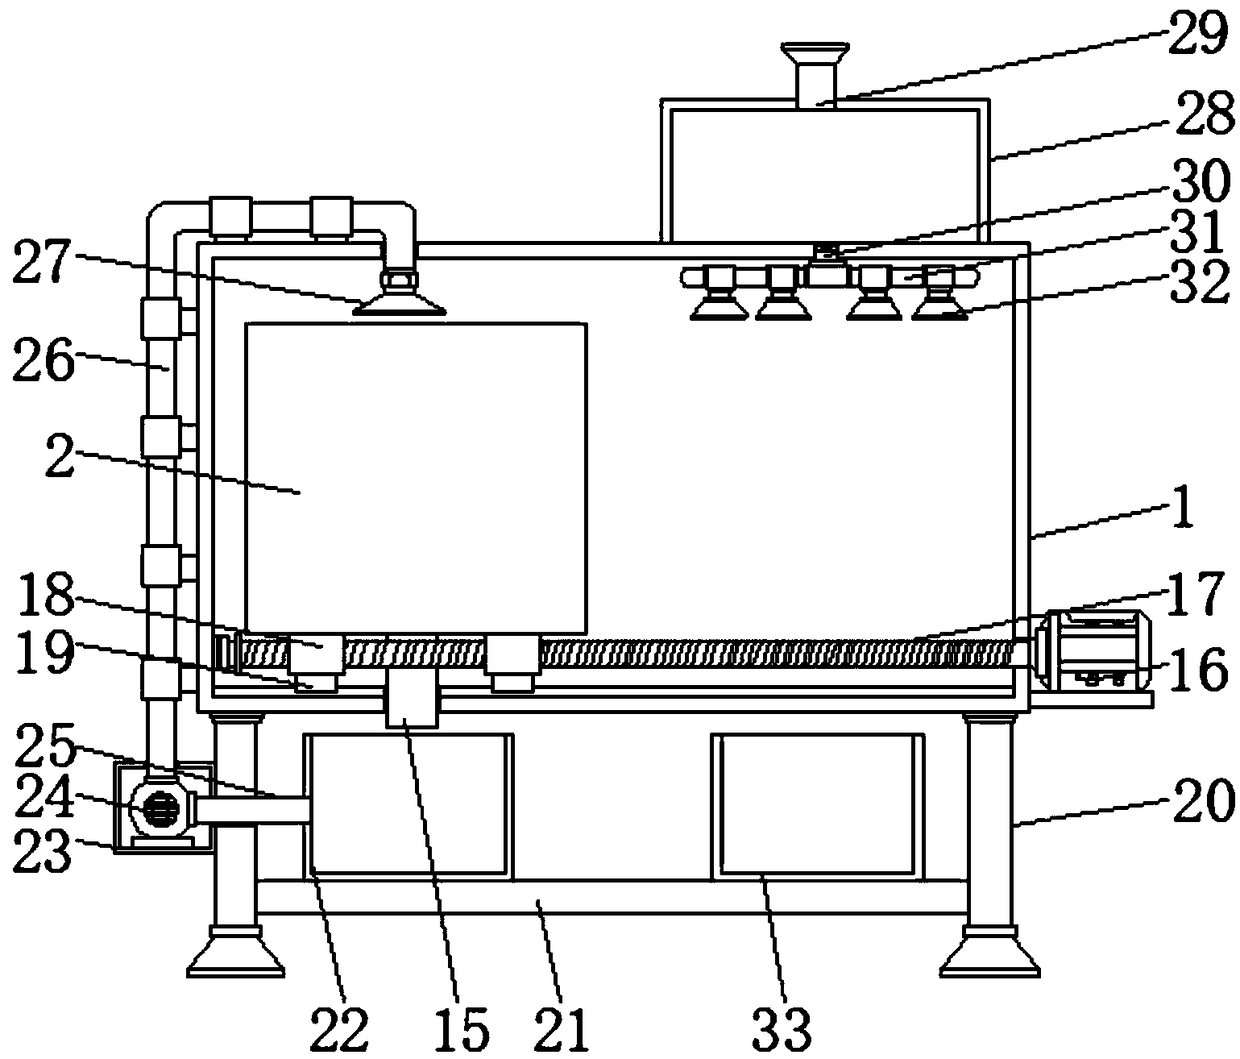 Full-automatic pickling unit for bearing part surface machining